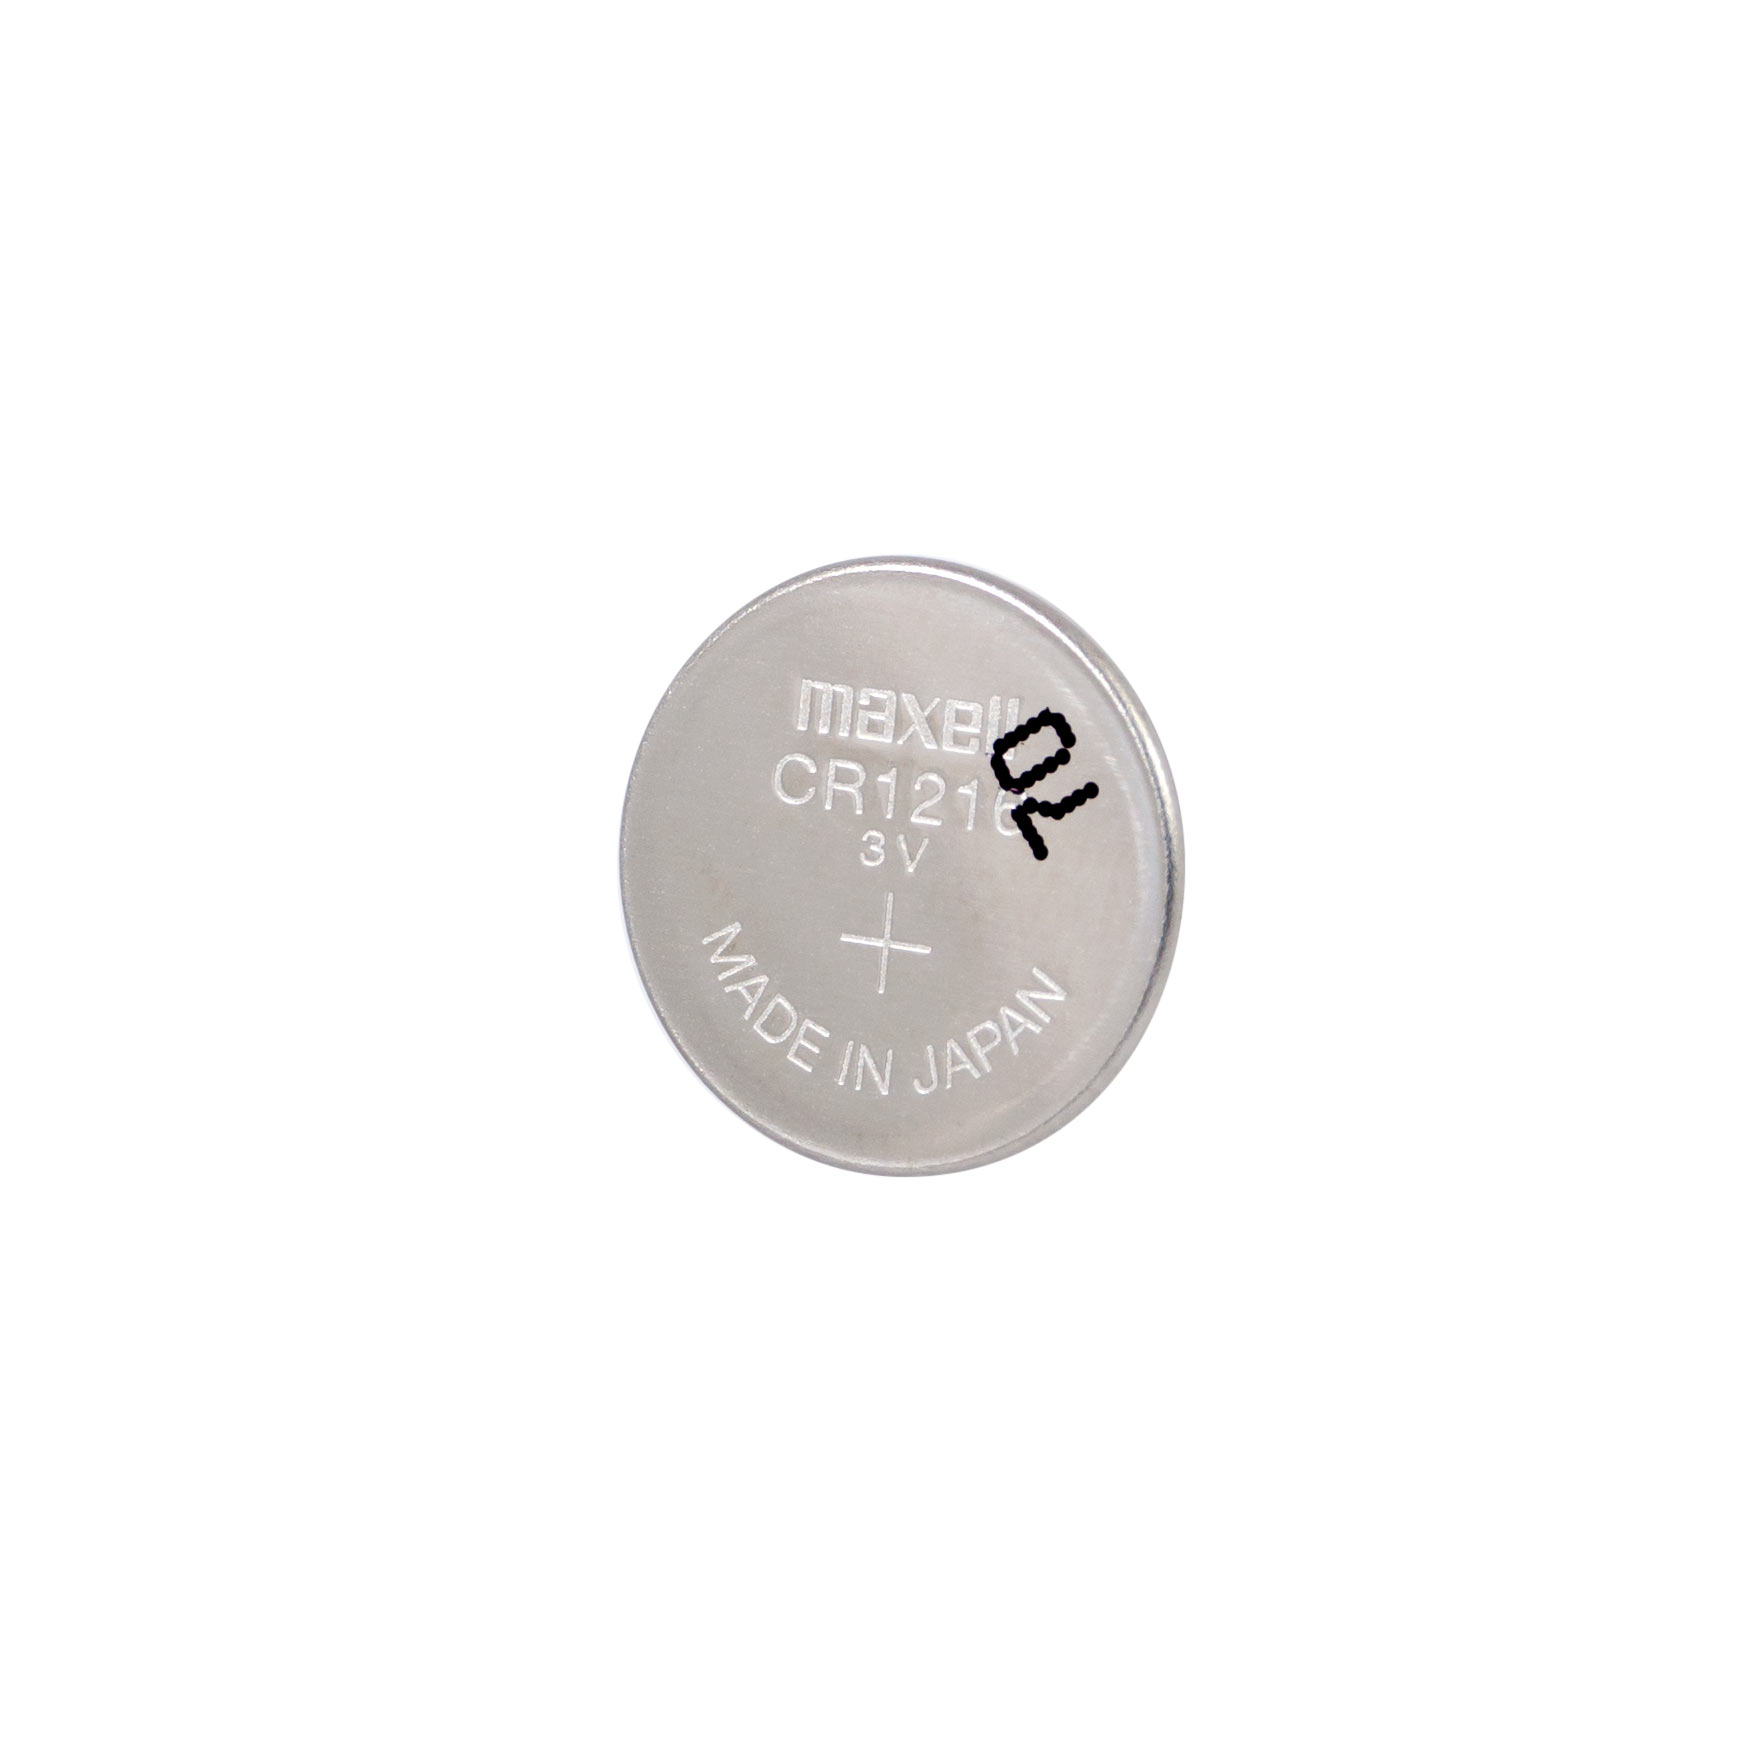 Maxell CR2025 3 Volt Lithium Coin Battery - 25 Pack New Exp.2023